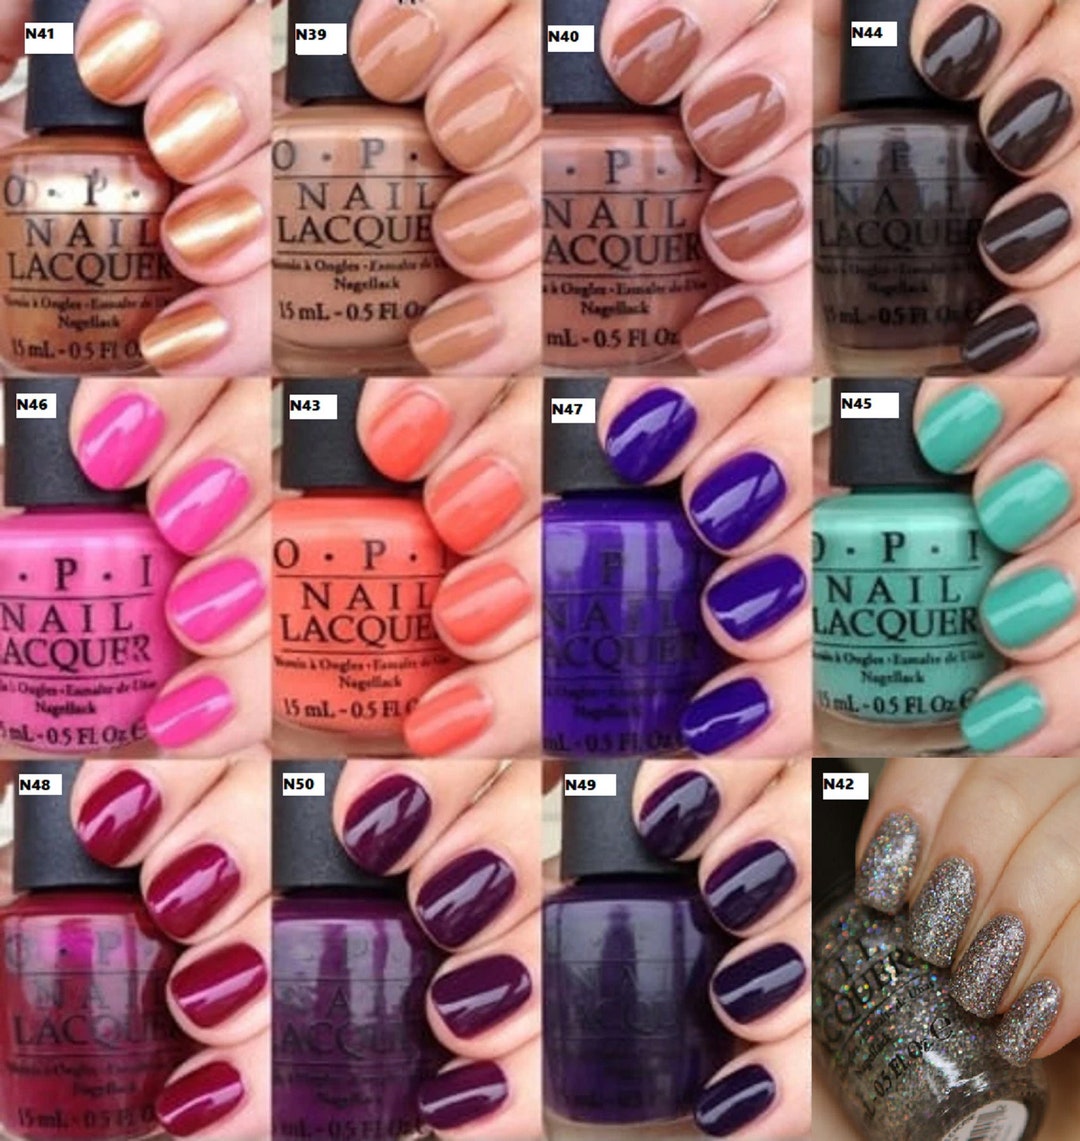 OPI Nail Polish Terribly Nice Collection Nail Lacquer Duo Pack - FREE  Delivery